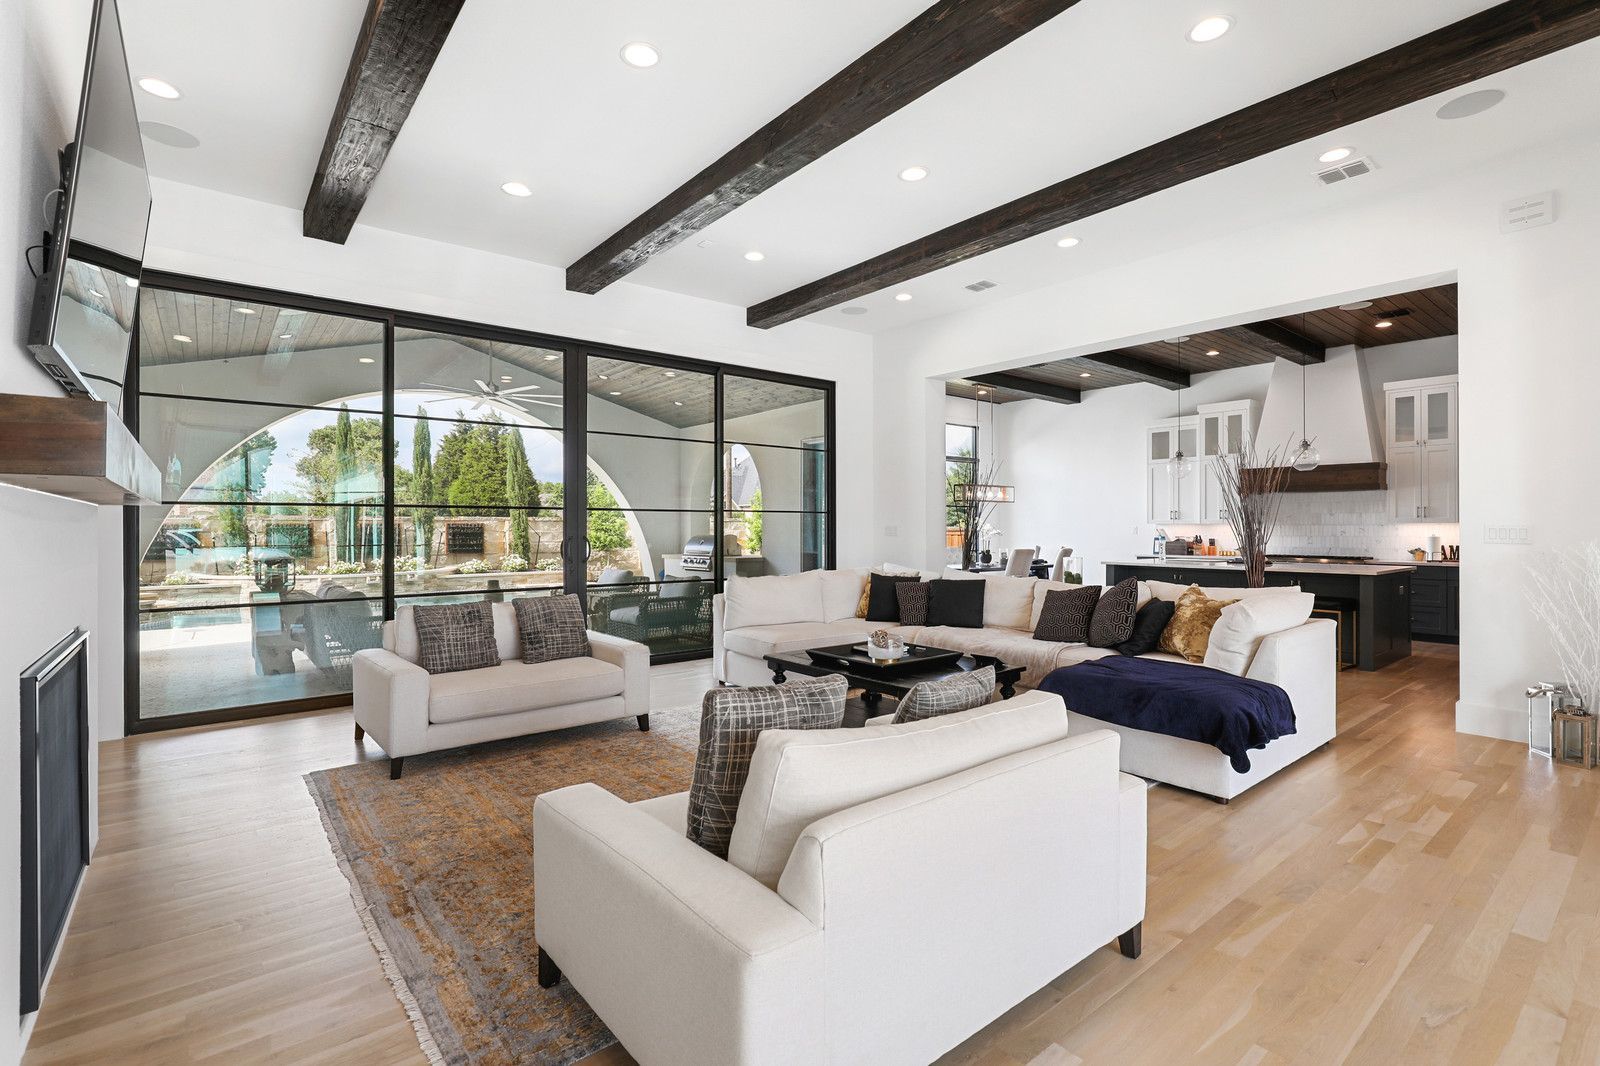 An inviting living room with cream sofas, wooden beams on the ceiling, and large glass windows offering views of an outdoor pool, reflecting PentaVia's remodeling expertise.
